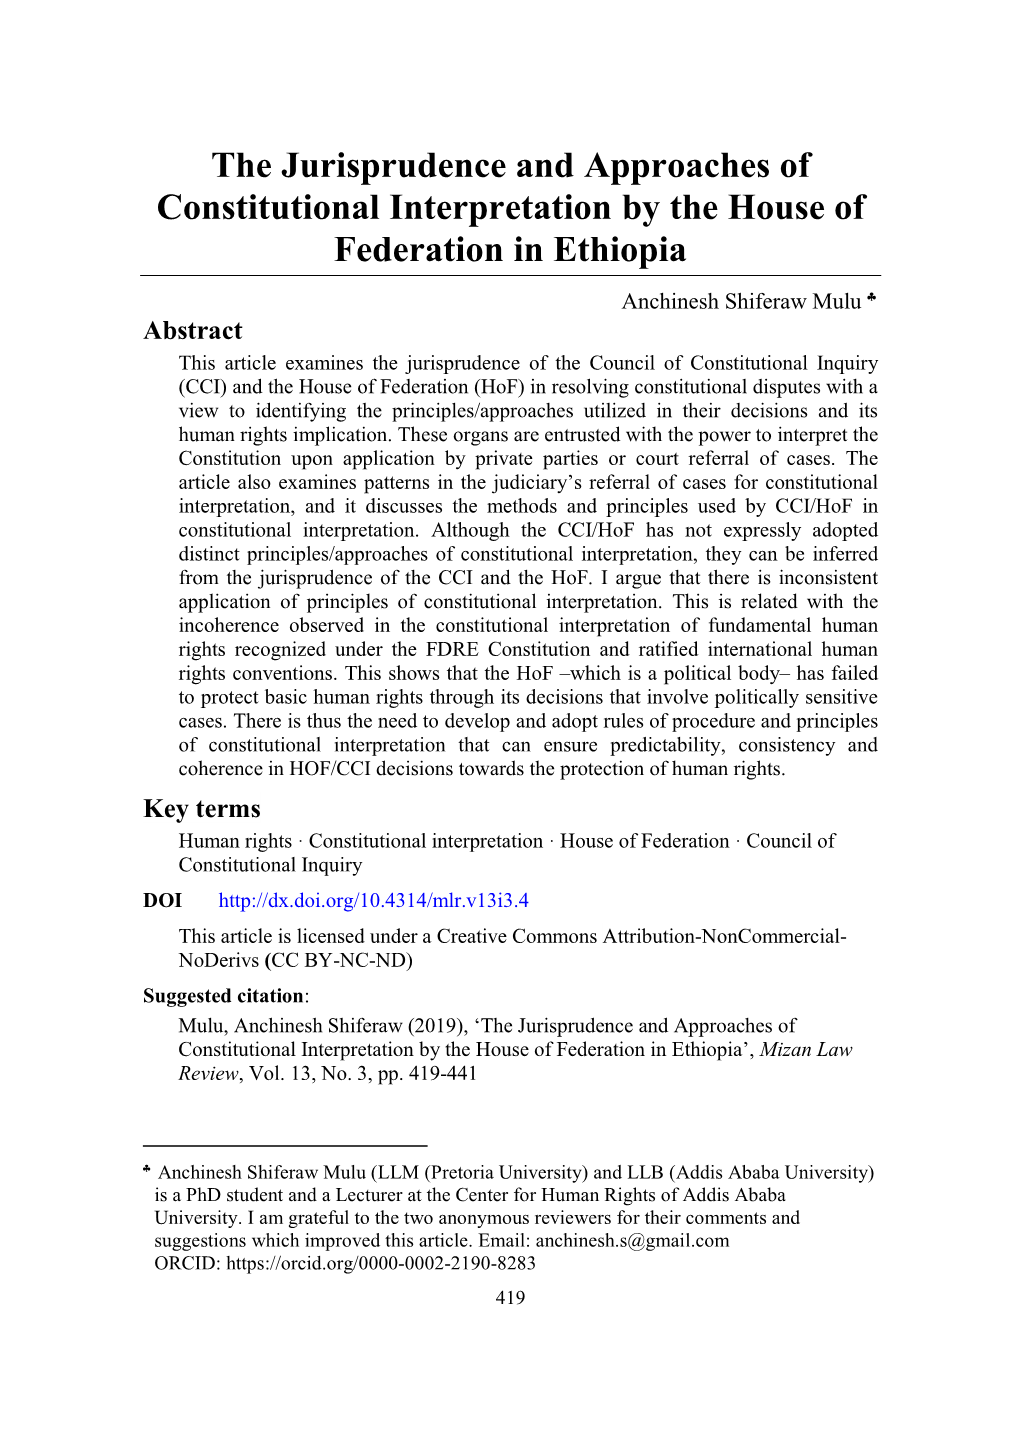 The Jurisprudence and Approaches of Constitutional Interpretation by the House of Federation in Ethiopia